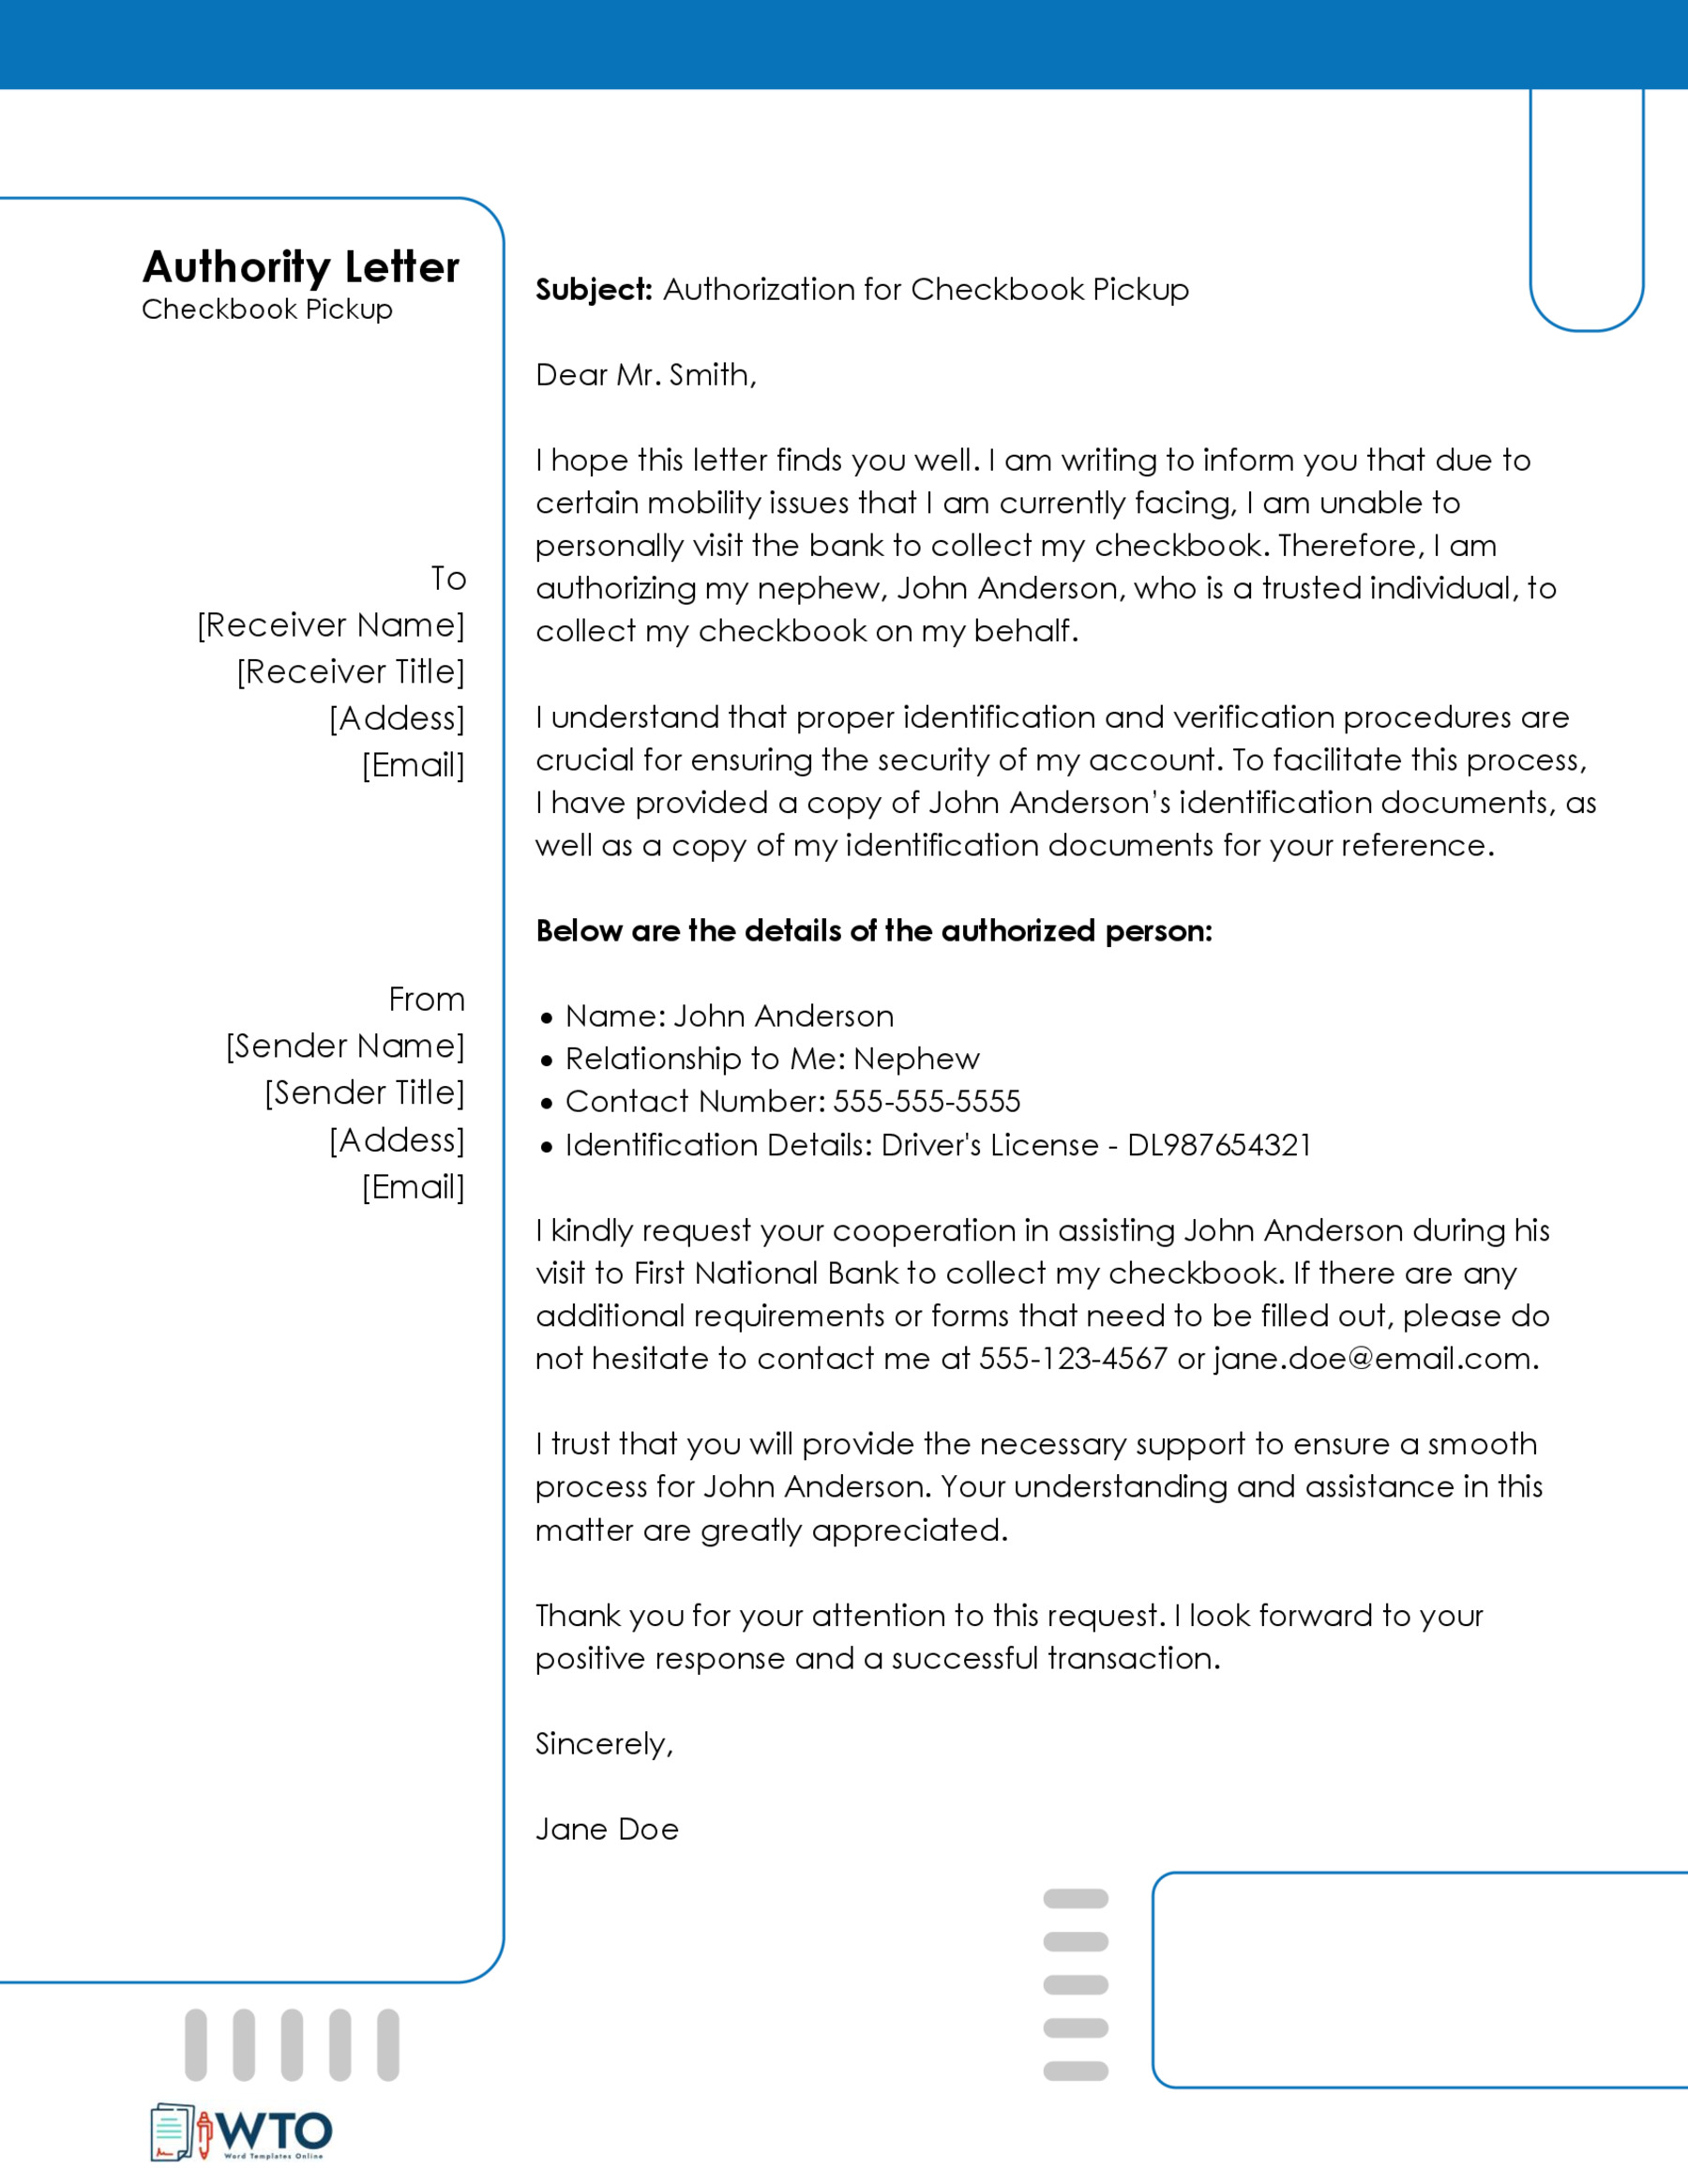 Sample Writing an Authorization Letter for Checkbook Pickup-Downloadable word format